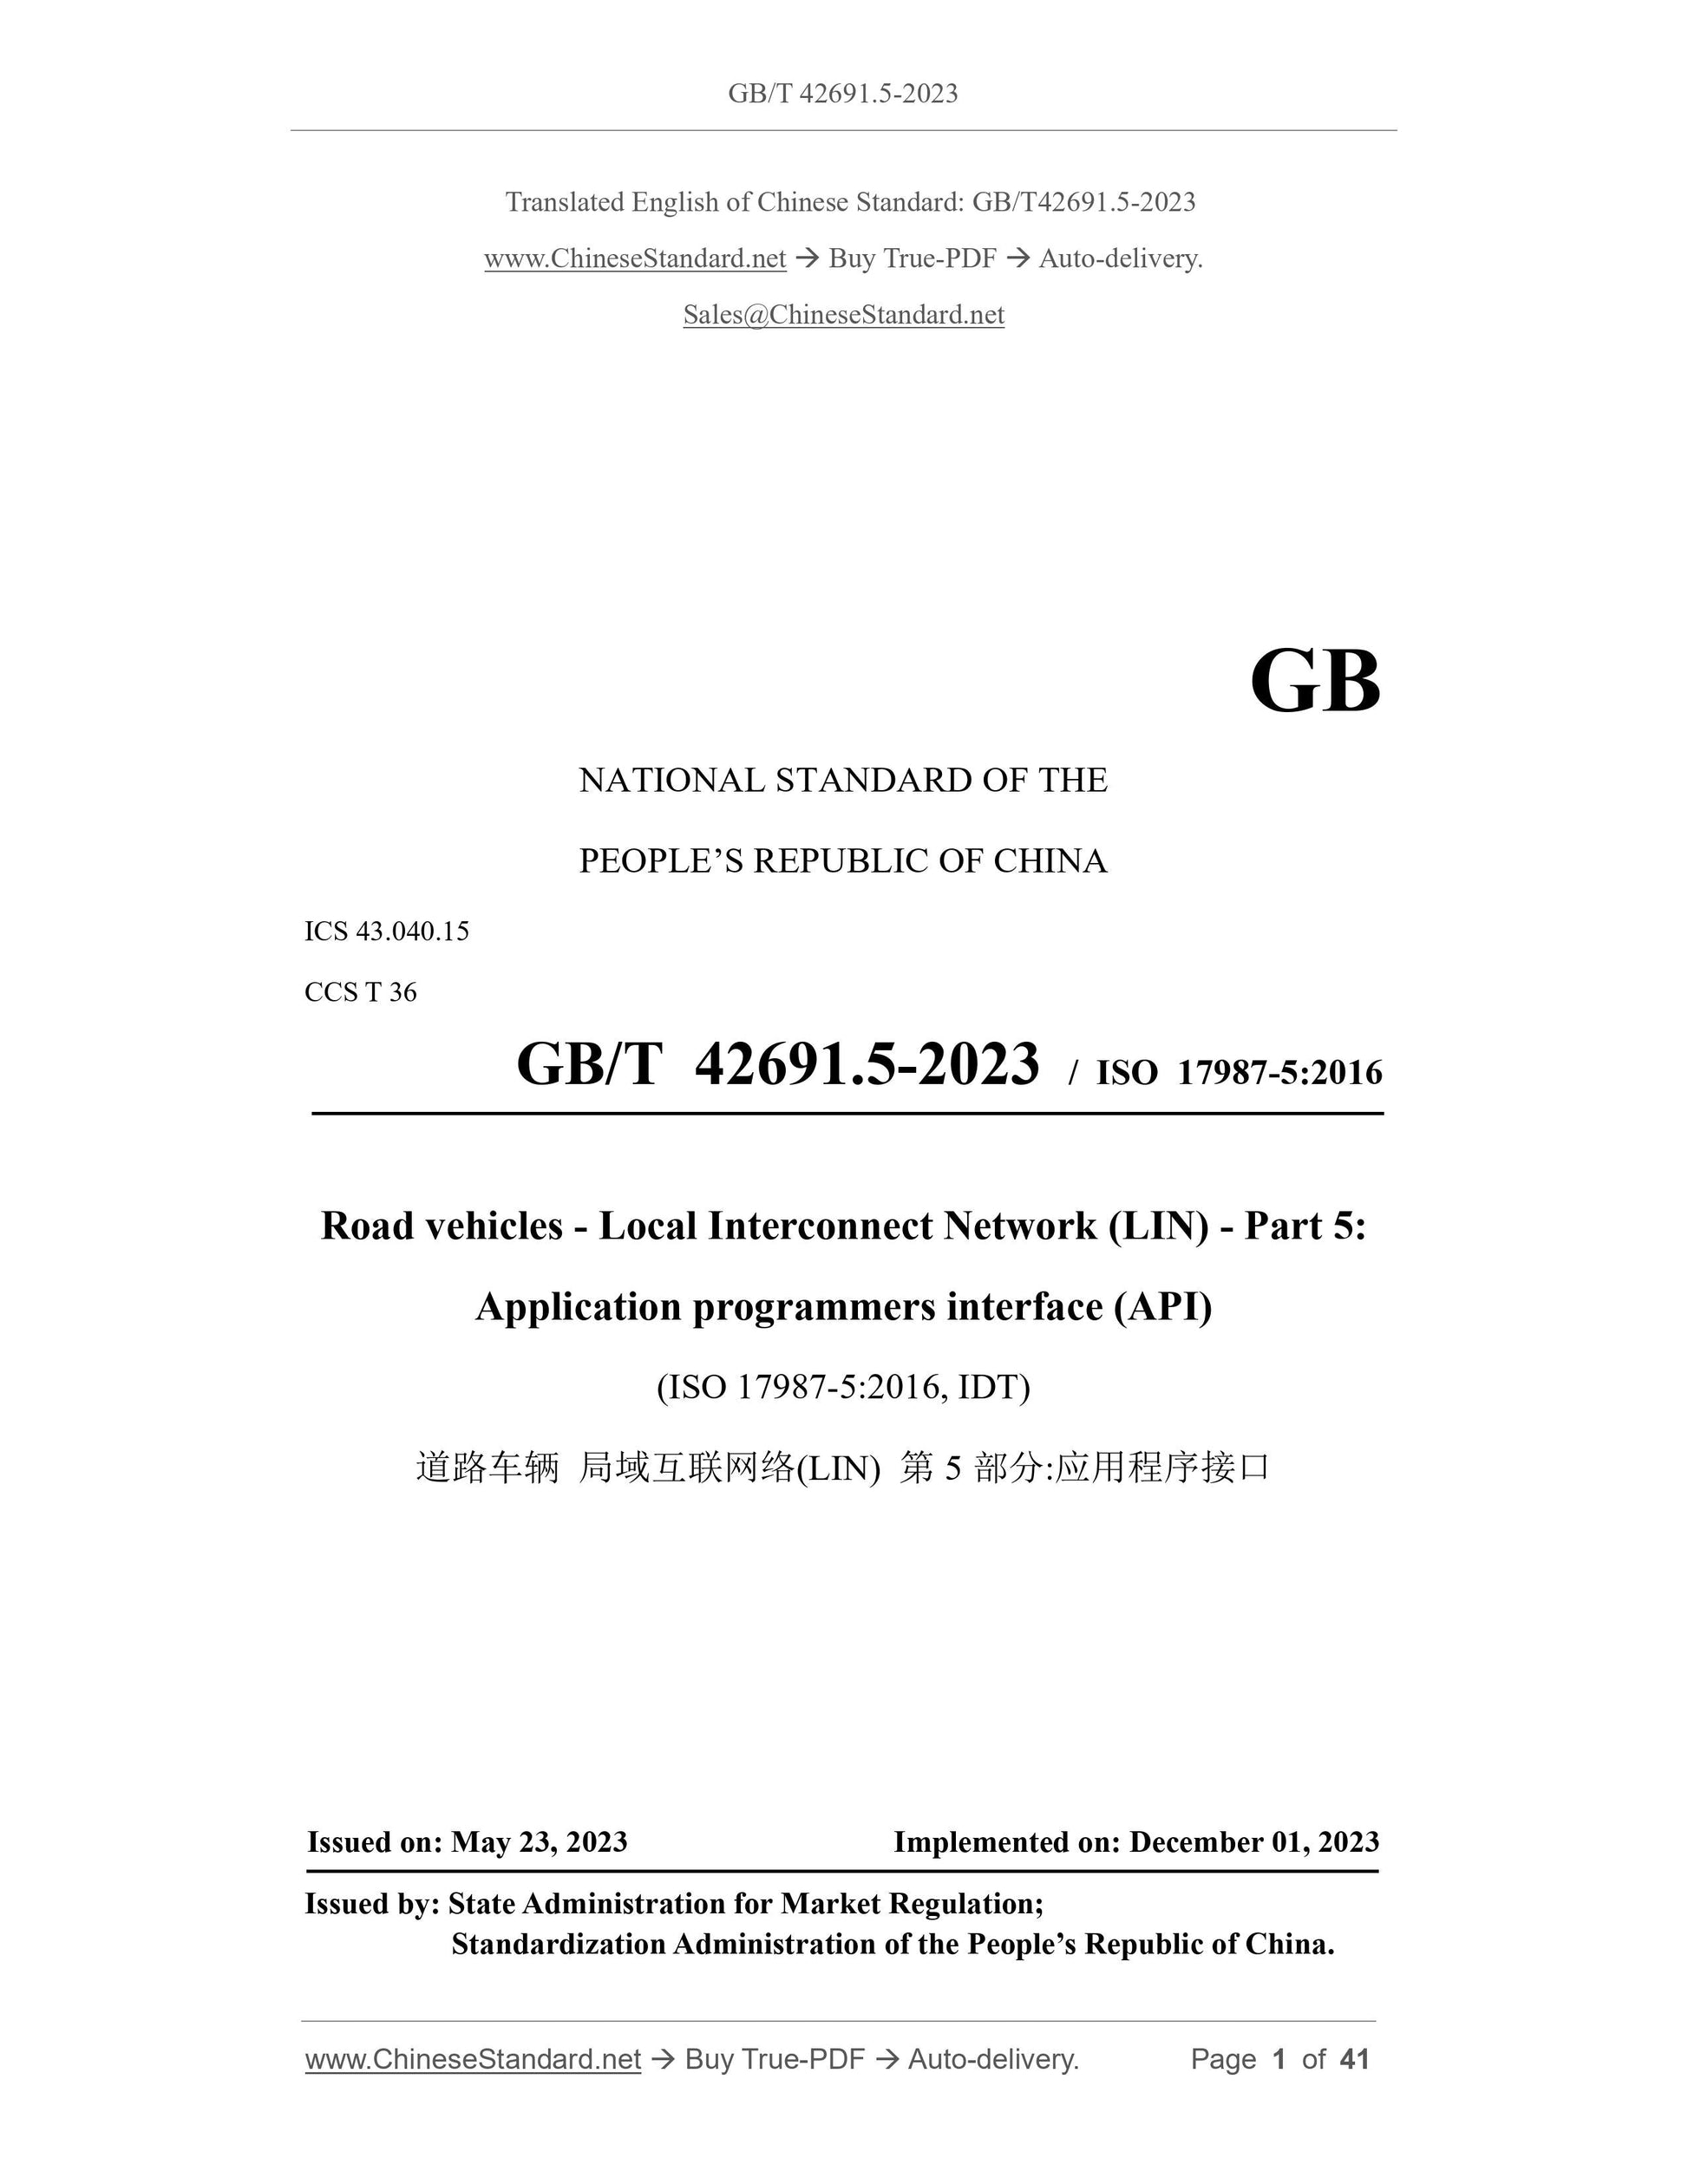 GB/T 42691.5-2023 Page 1